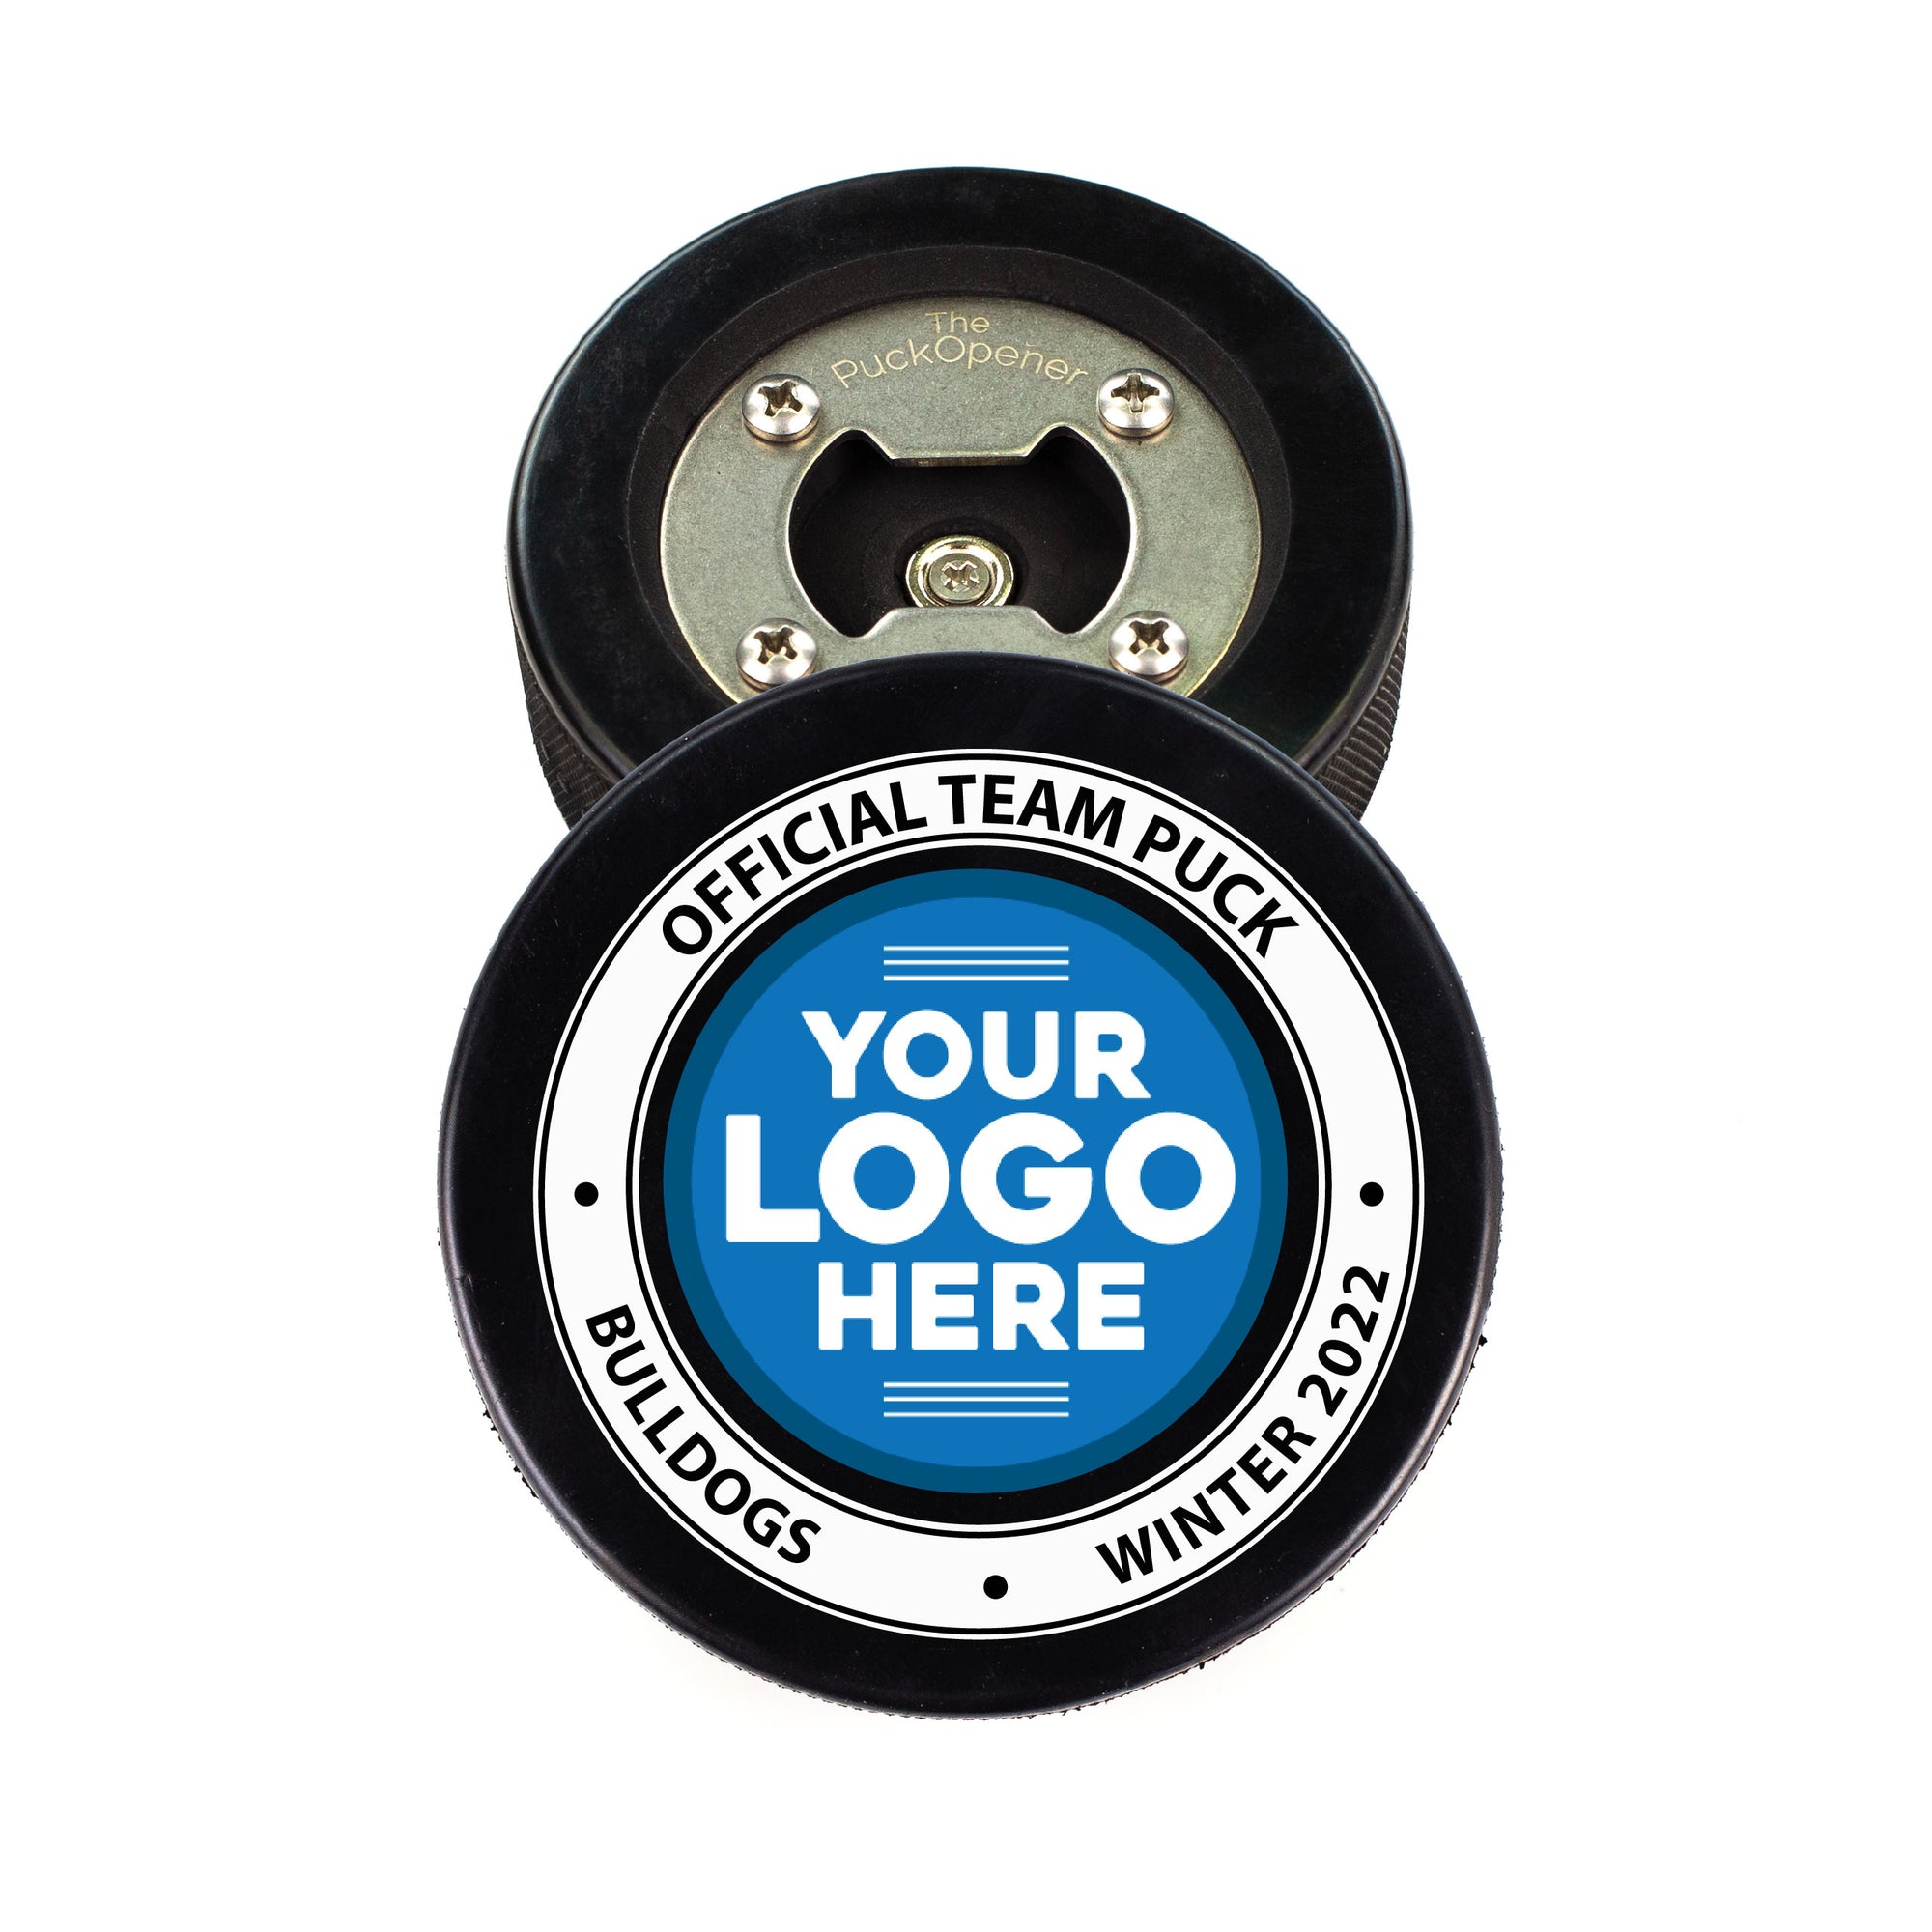 Hockey Puck Bottle Opener with Official Team Puck Logo Design